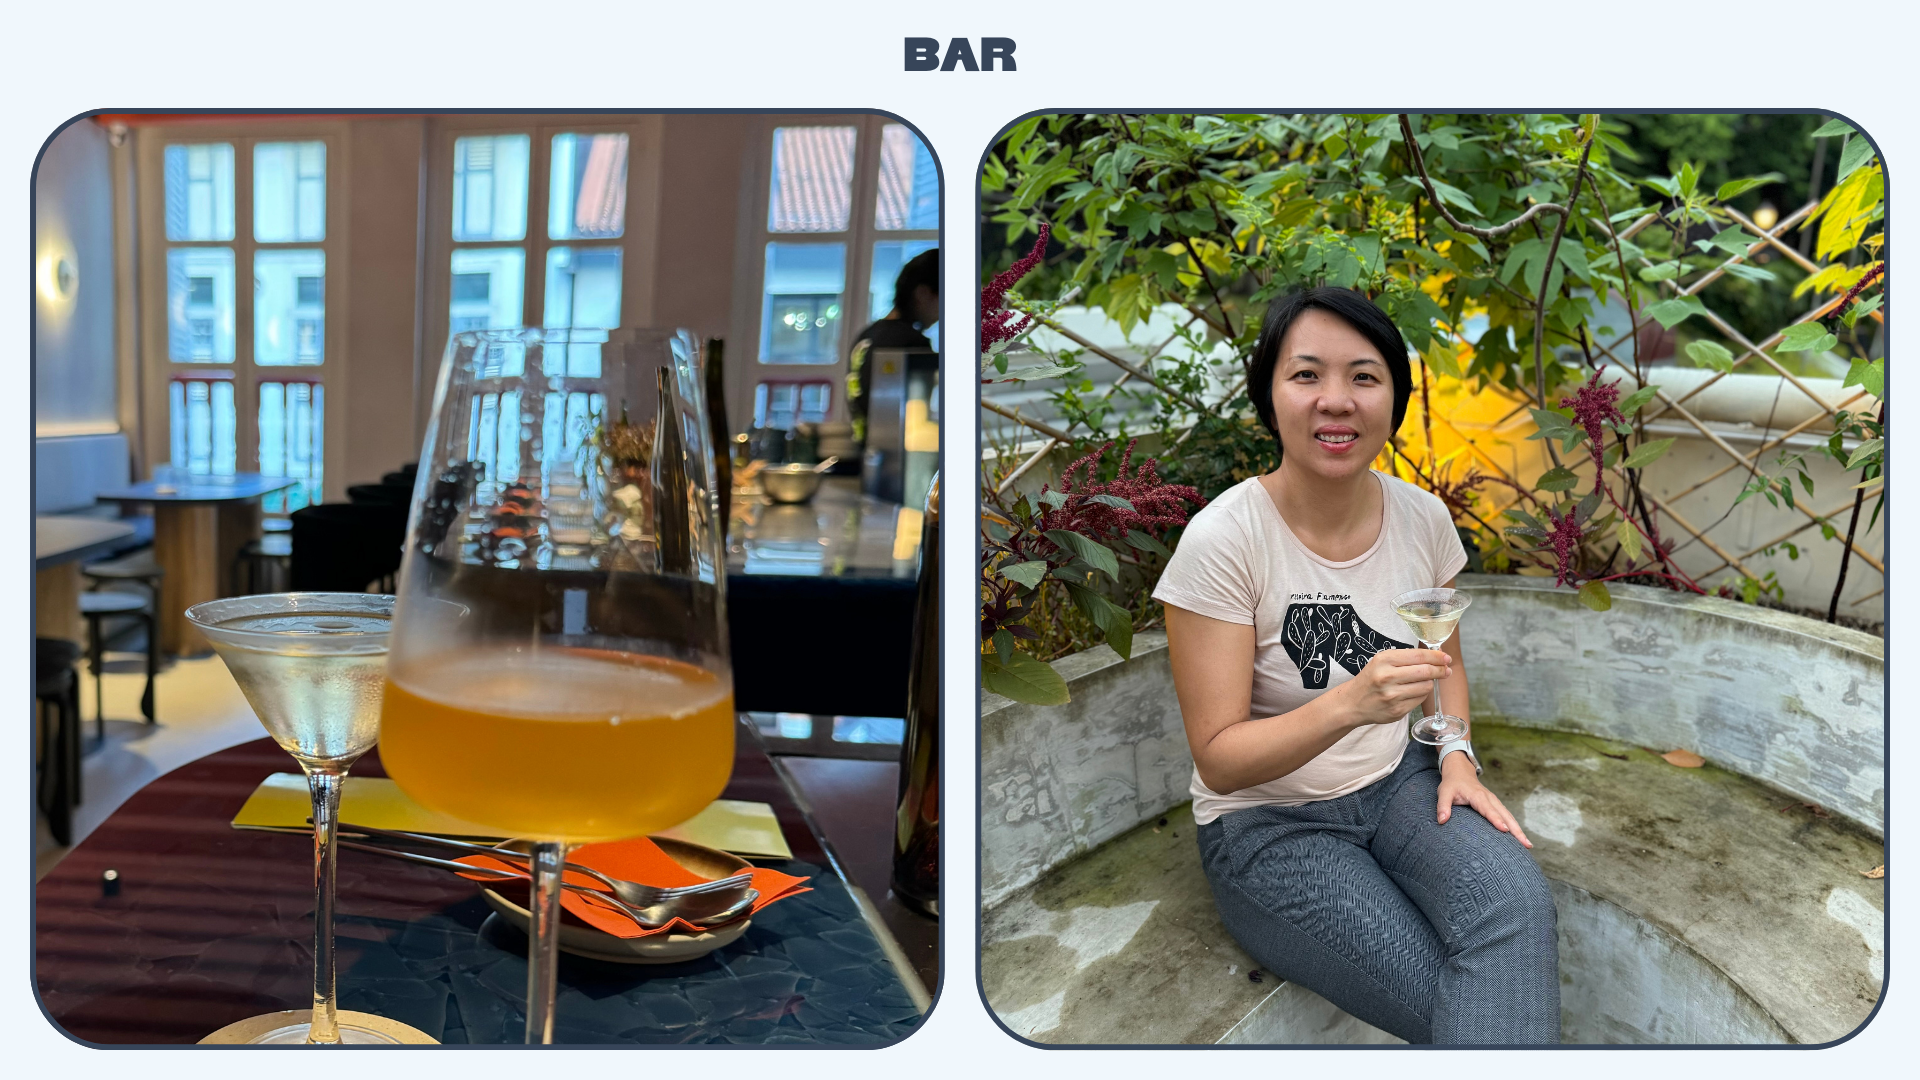 Two cocktails served in glasses, and a woman sat smiling while holding a drink